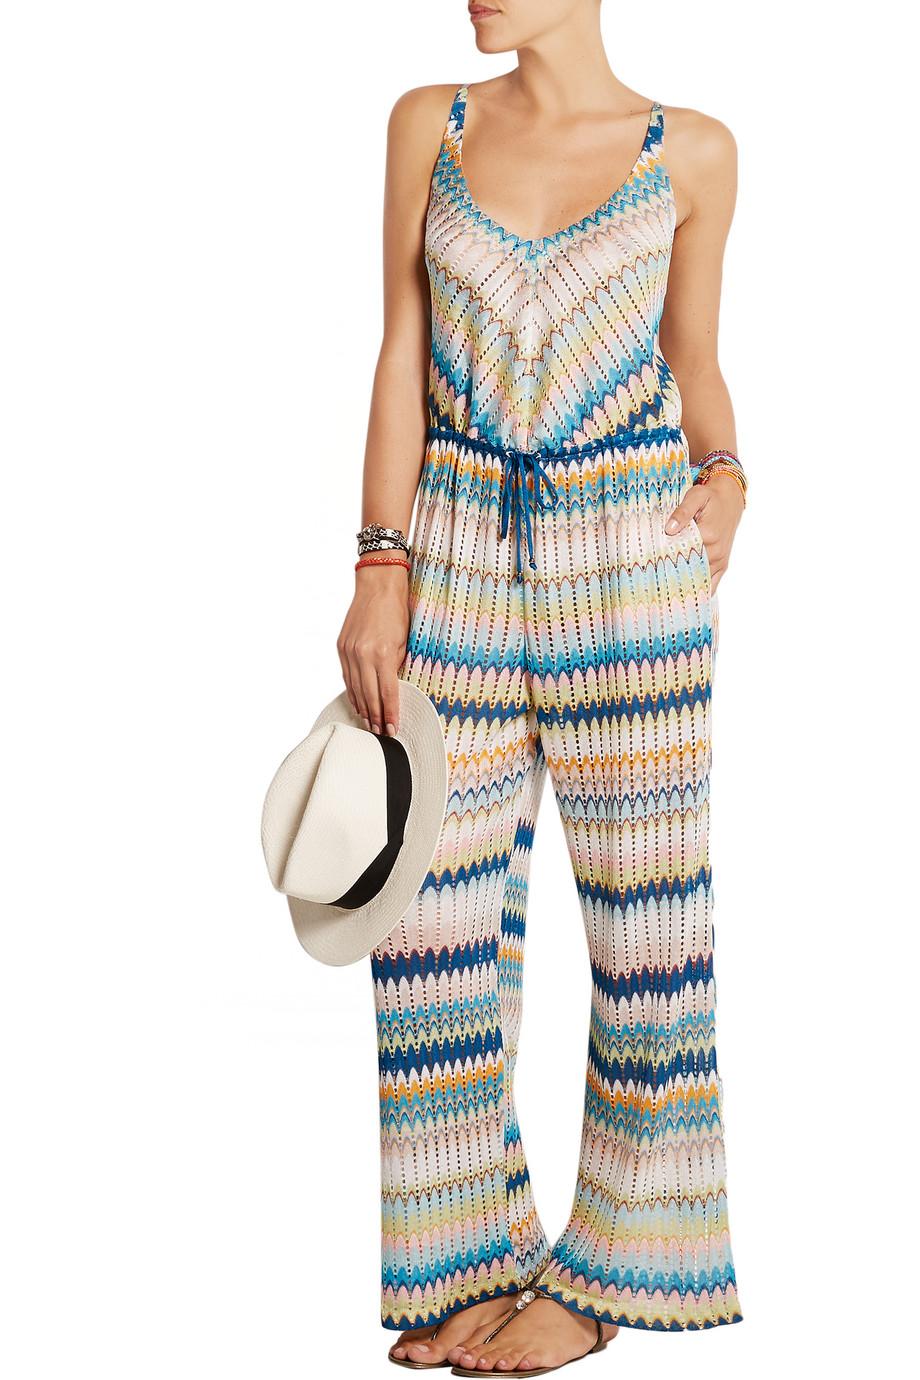 Missoni siganture jumpsuit
Classic MISSONI signature zigzag crochet knit
Simply slips on
Drawstring waist
Two side pockets
Wide palazzo legs
Dry Clean only
Made in Italy
Size 38
New, unworn

Please see celebrity pictures for style reference only